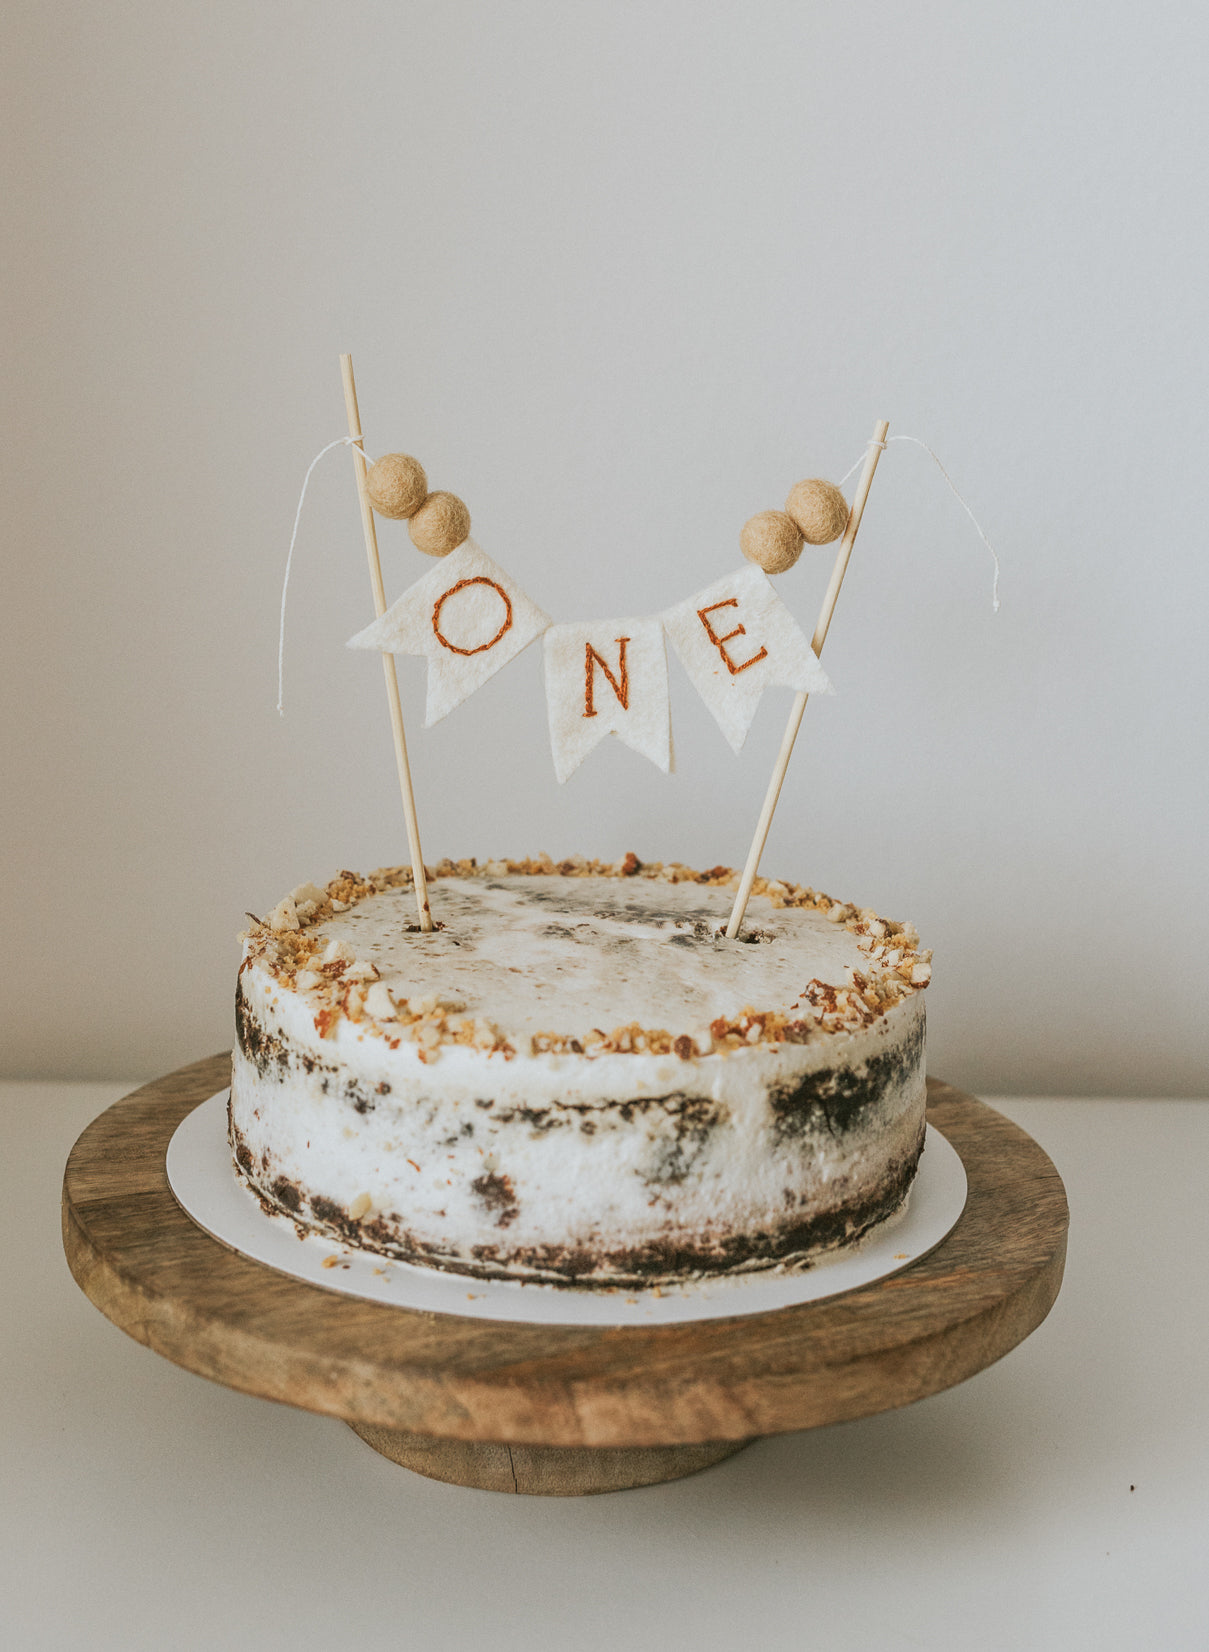 Toppere tort "One